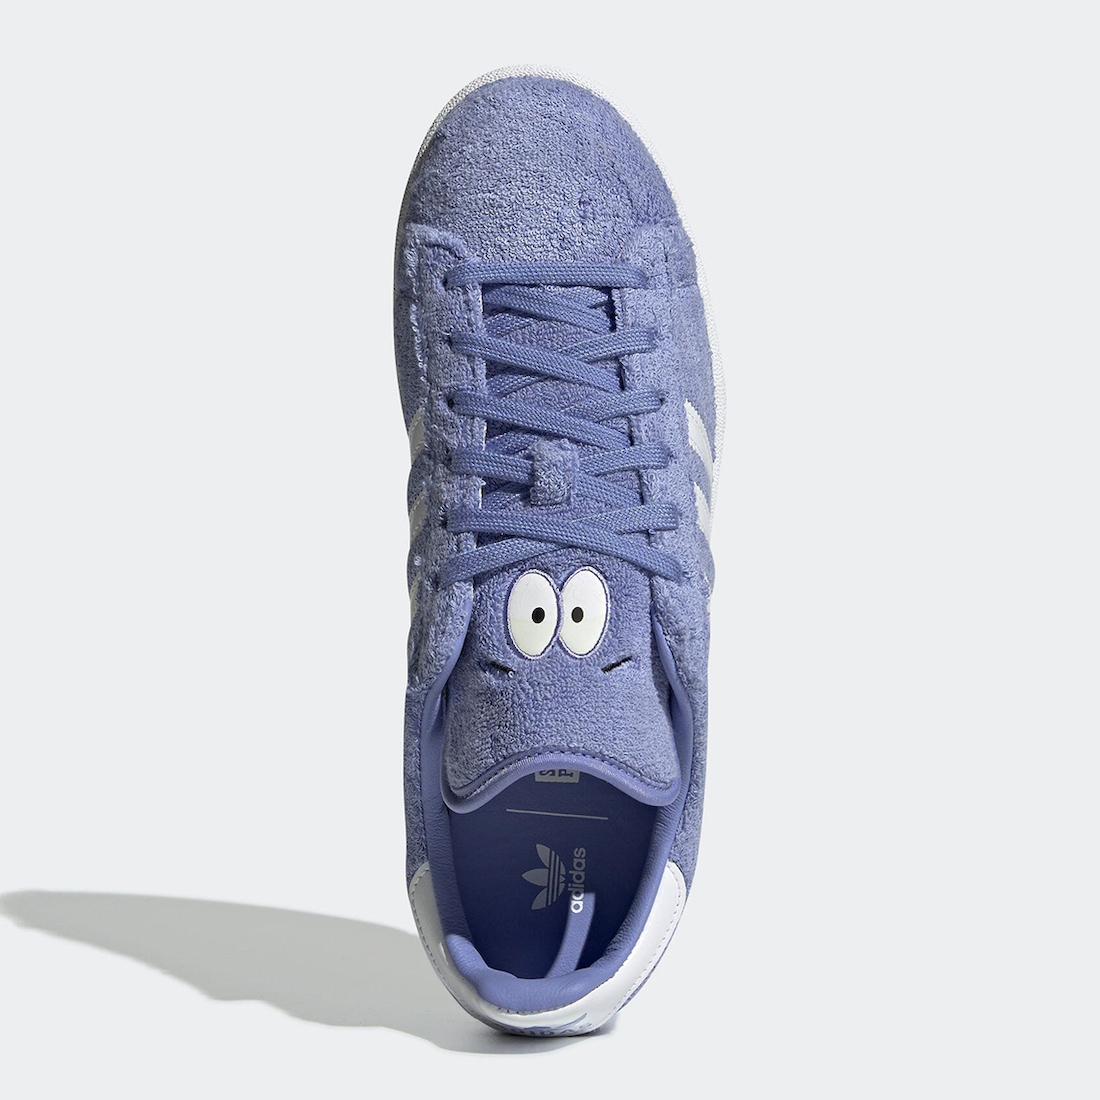 South Park adidas Campus 80s Towelie GZ9177 Release Date